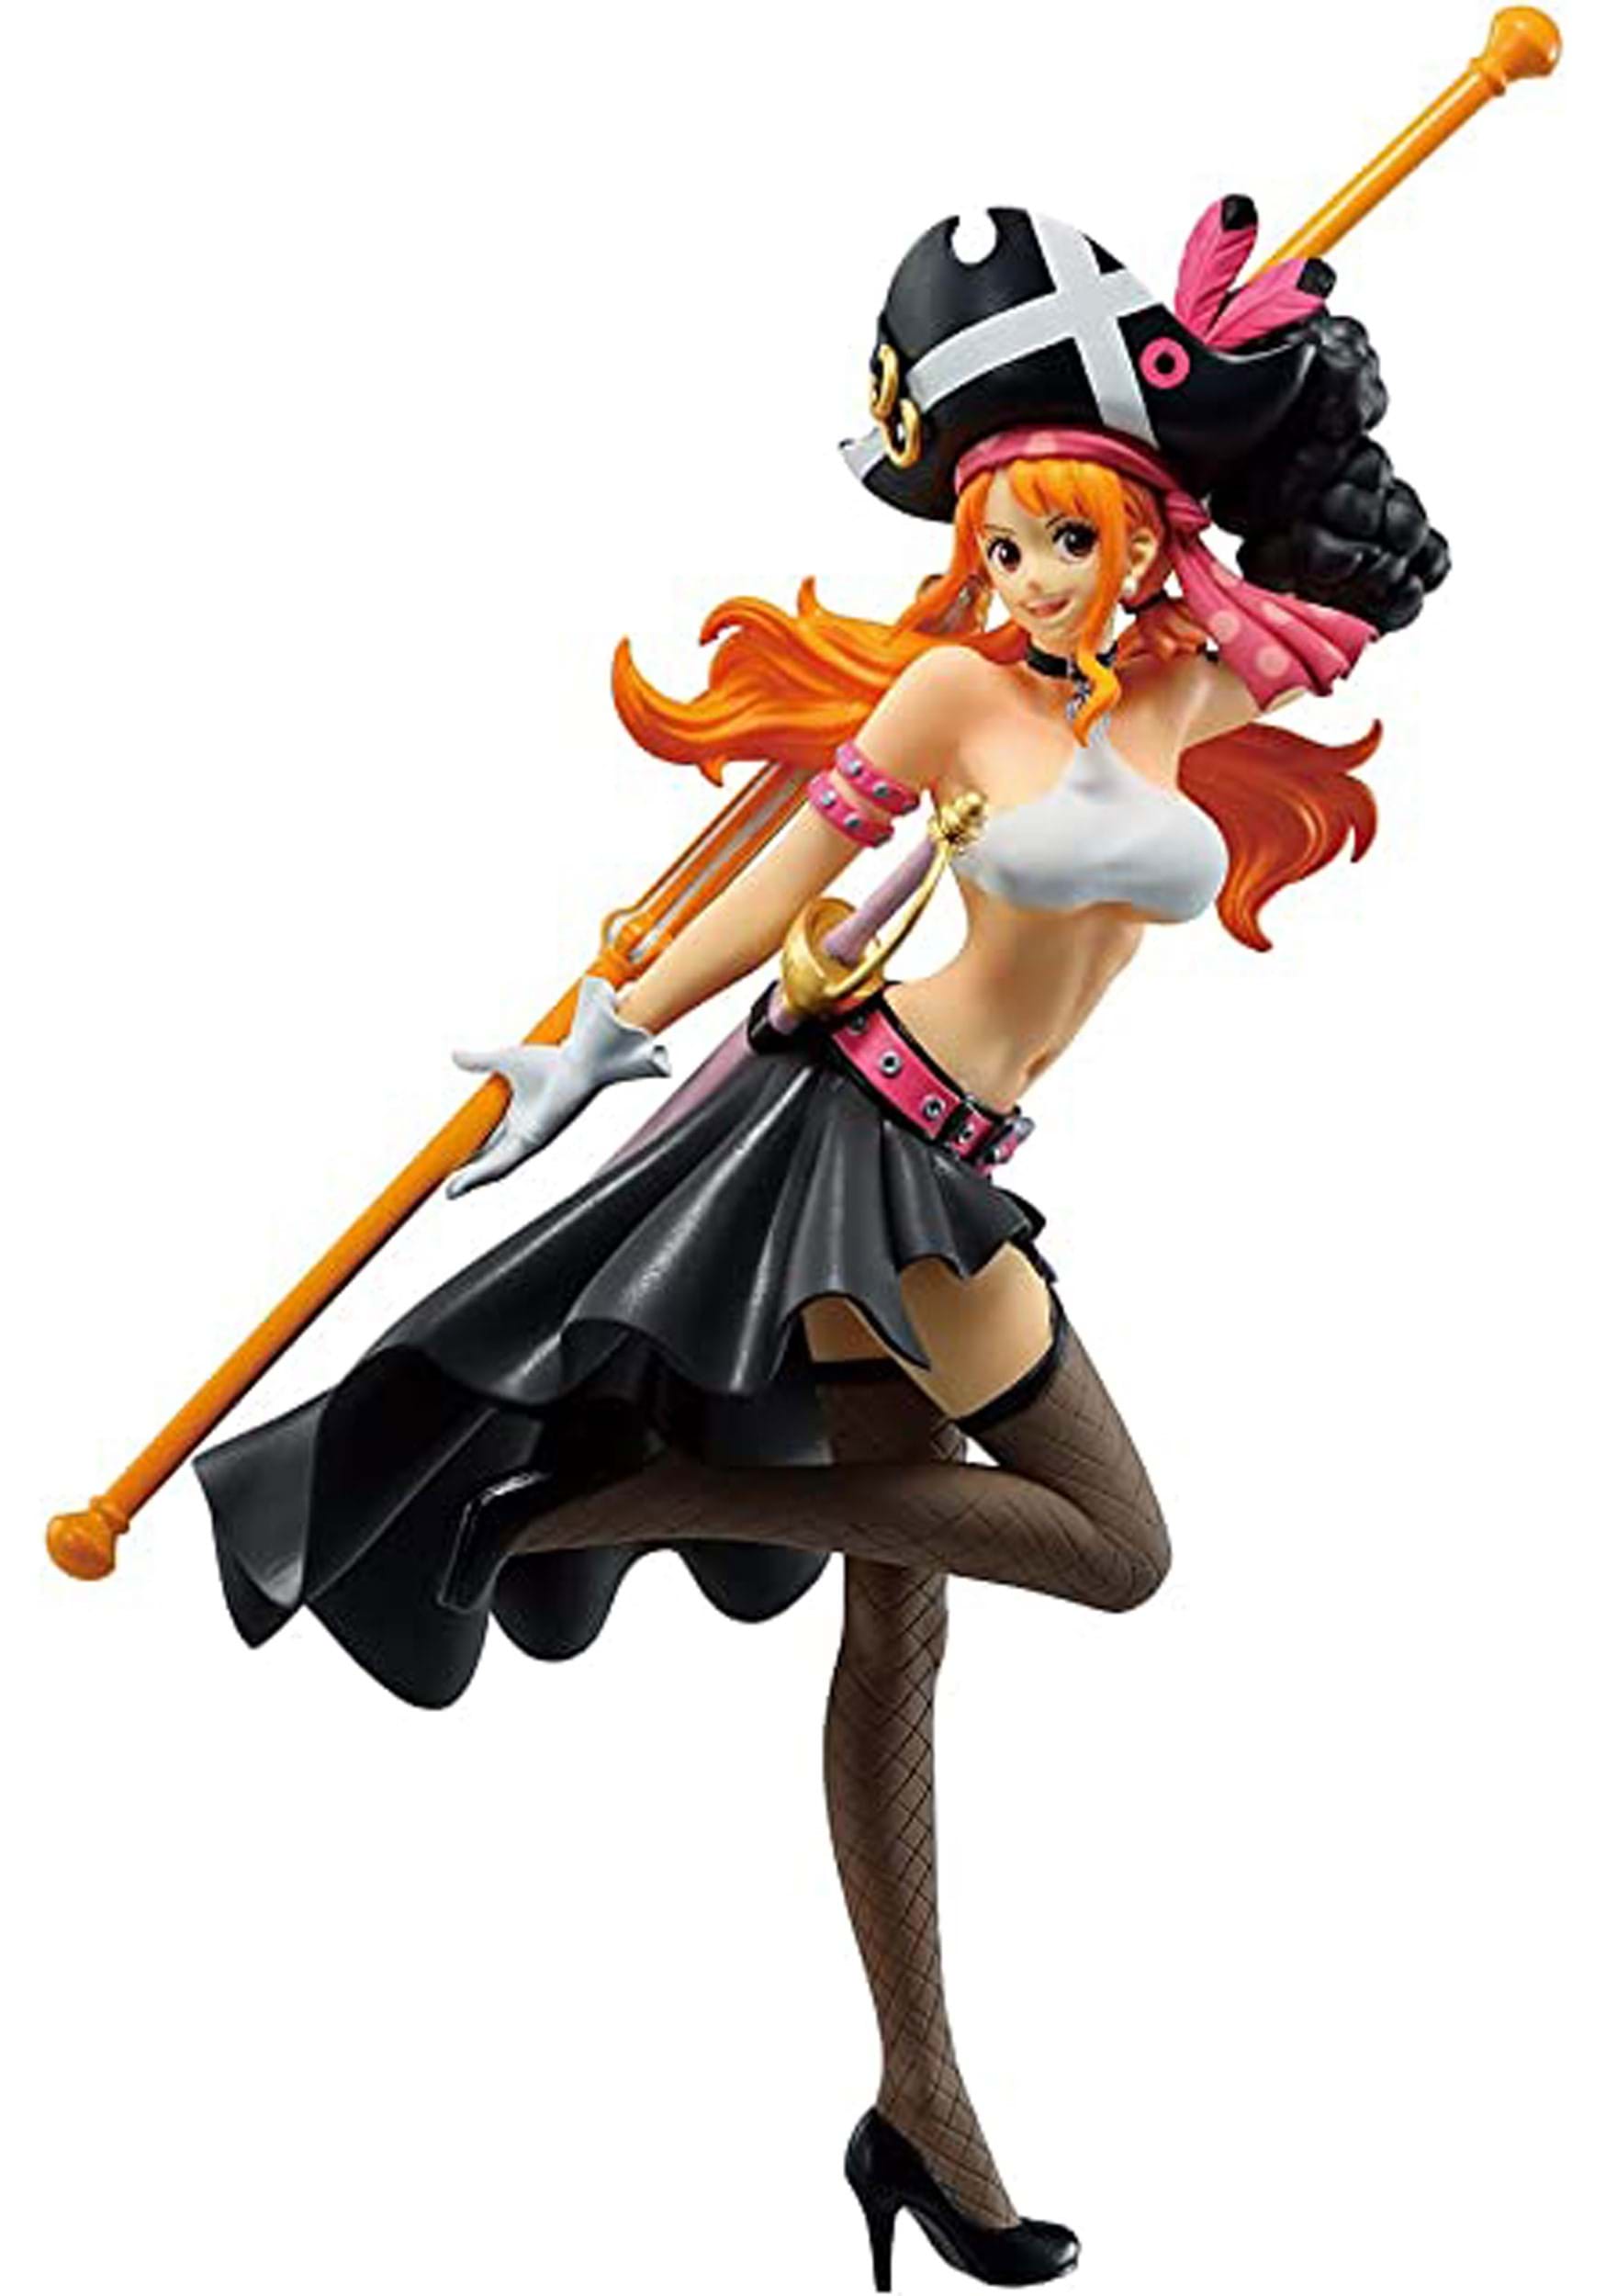 Image of Bandai One Piece Film Red: Nami Ichibansho Statue | Anime Collectibles